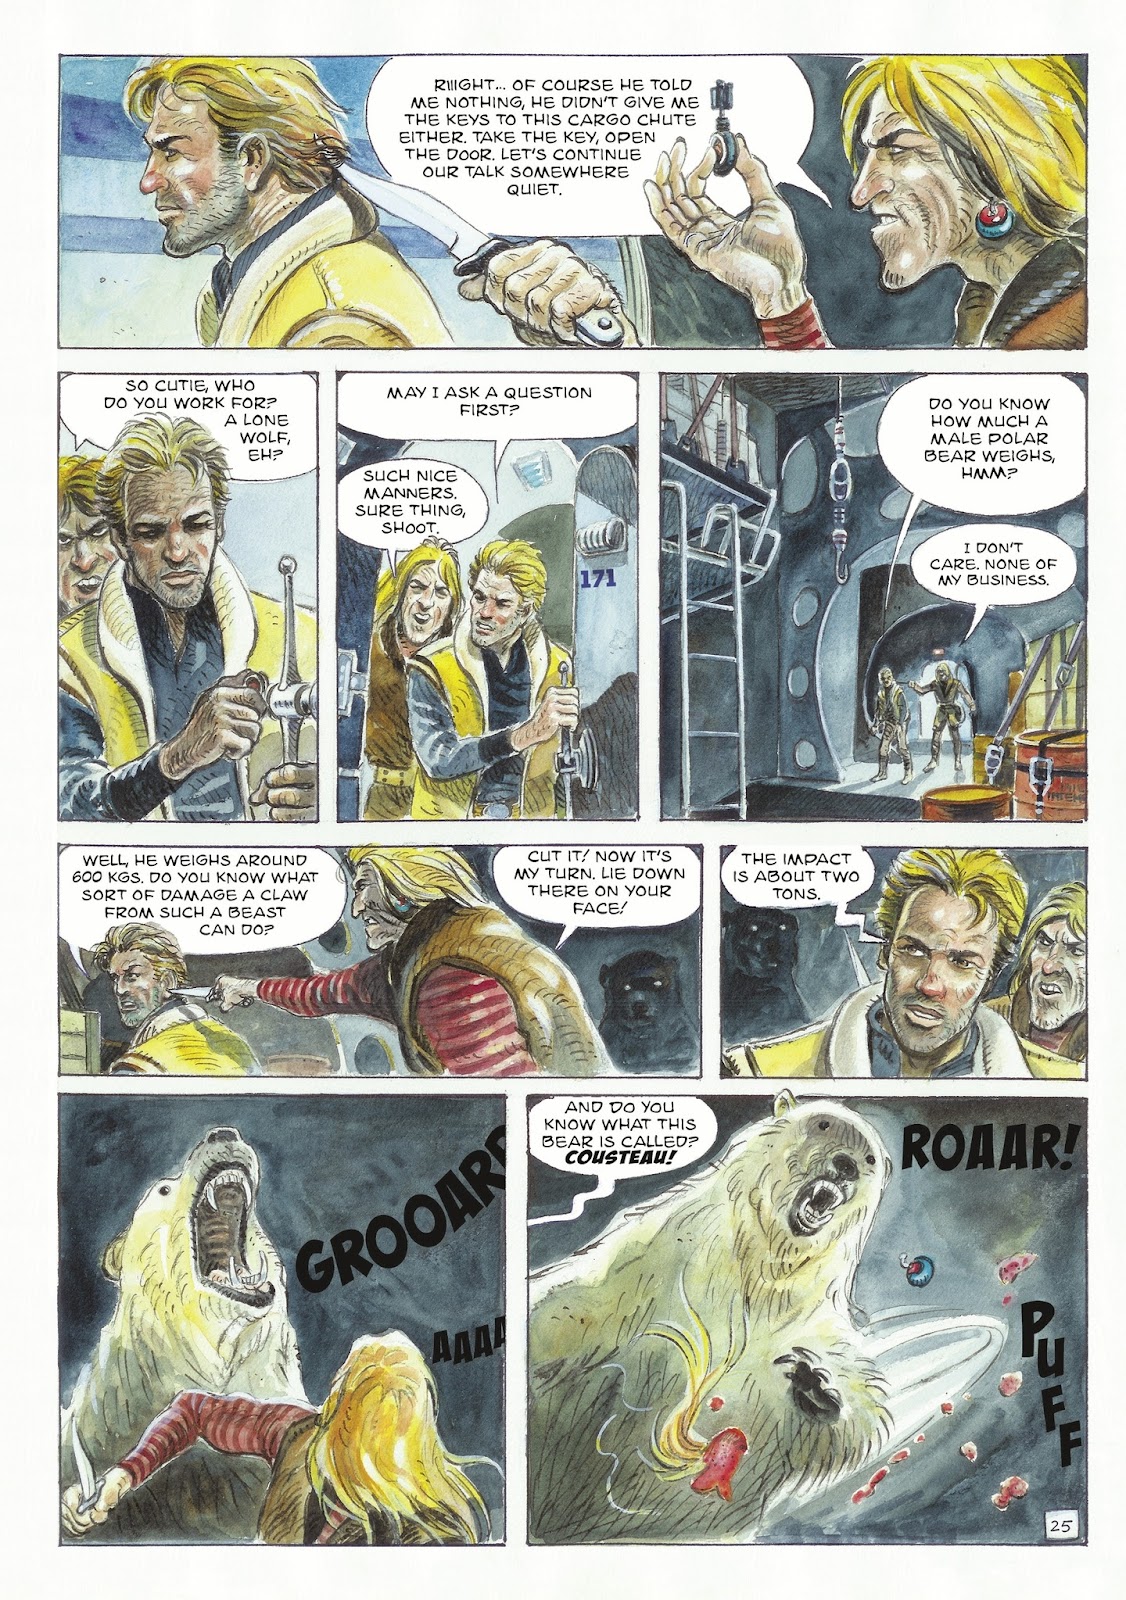 The Man With the Bear issue 1 - Page 27